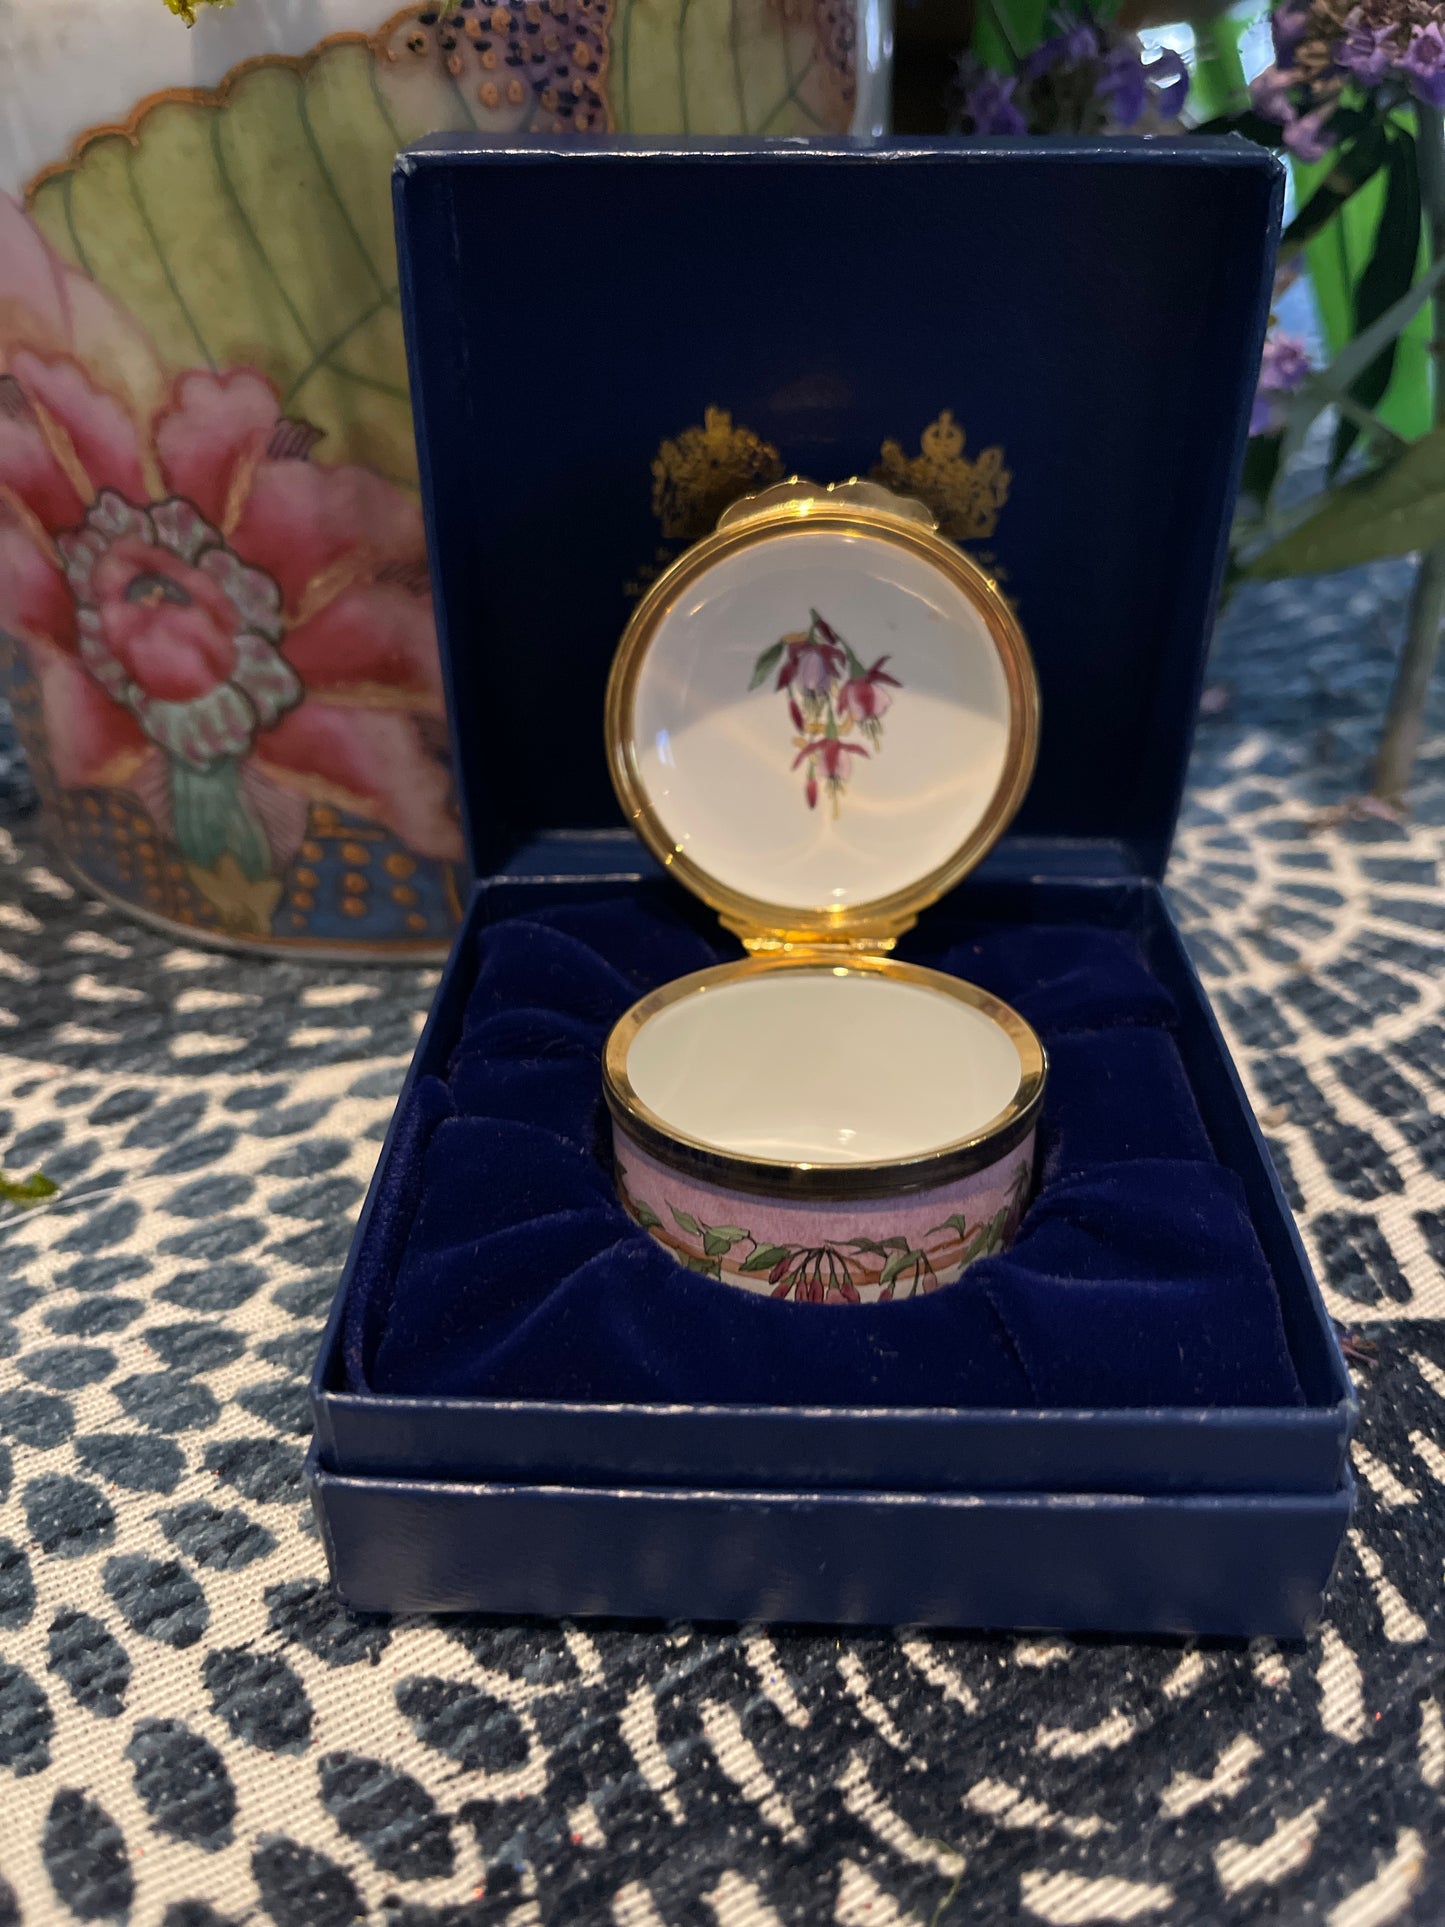 Halcyon Days Enamel Box with Pink Flowers, Viney Green Foliage and a Buzzing Bee, Made in England, Original Box